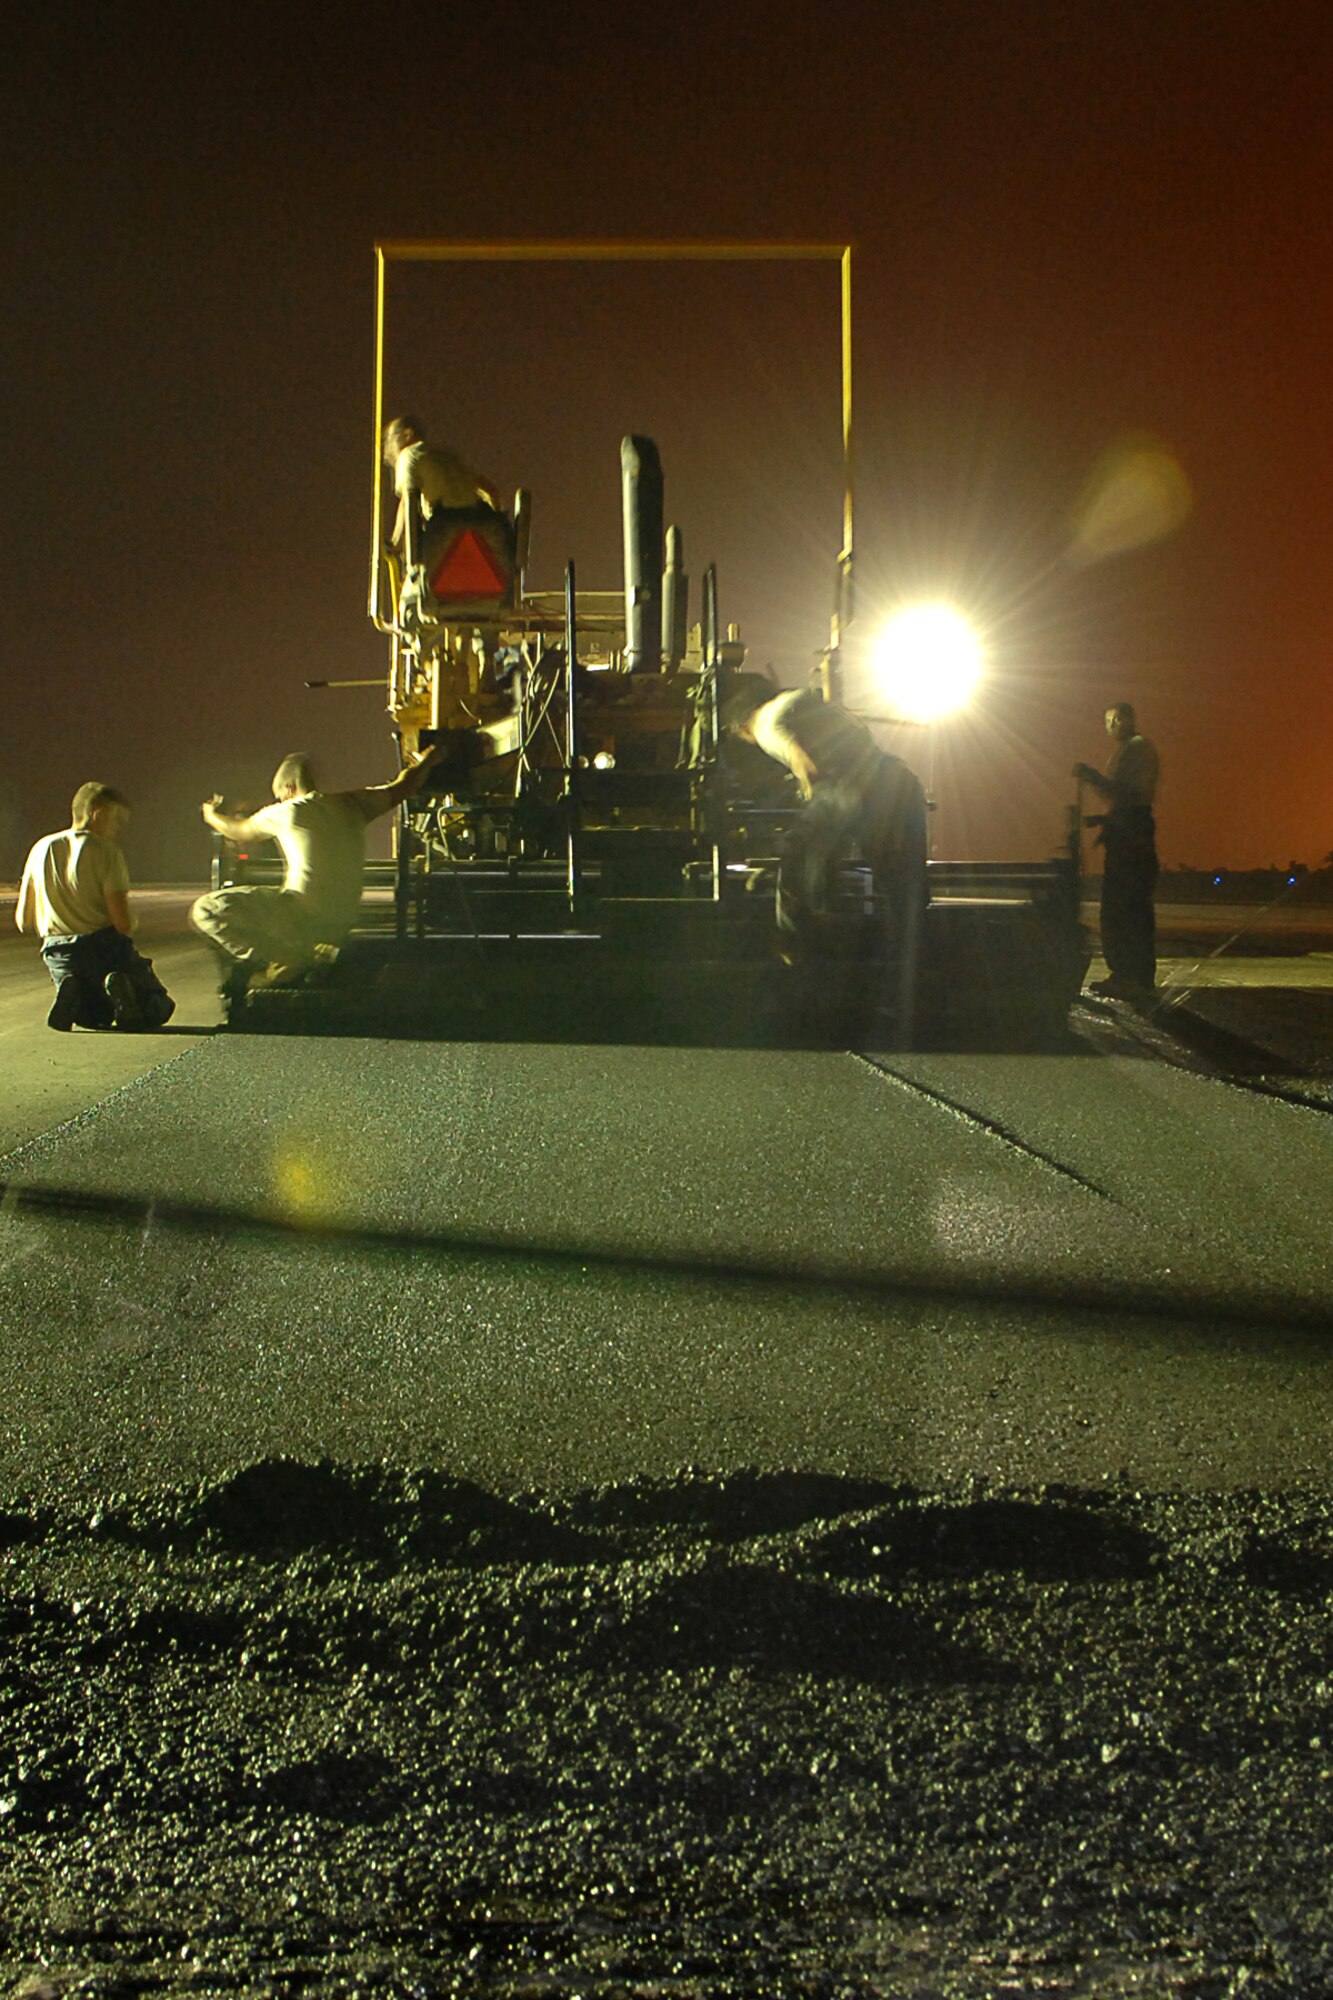 KIRKUK REGIONAL AIR BASE, Iraq -- Red Horse Airmen begin to lay asphalt on the runway here Aug 28.  The team is made up of Airmen from around the Air Force and are here for approximately 90 days to repair the runway. The project will help reduce FOD and eliminate cracks and potholes of the old surface.  They've completed the milling of 1.3 million square feet of runway and are in the process of laying down 38,000 tons of asphalt.  The job is due to be completed Oct. 1. (U.S Air Force photo/ Senior Airman Randi Flaugh)
